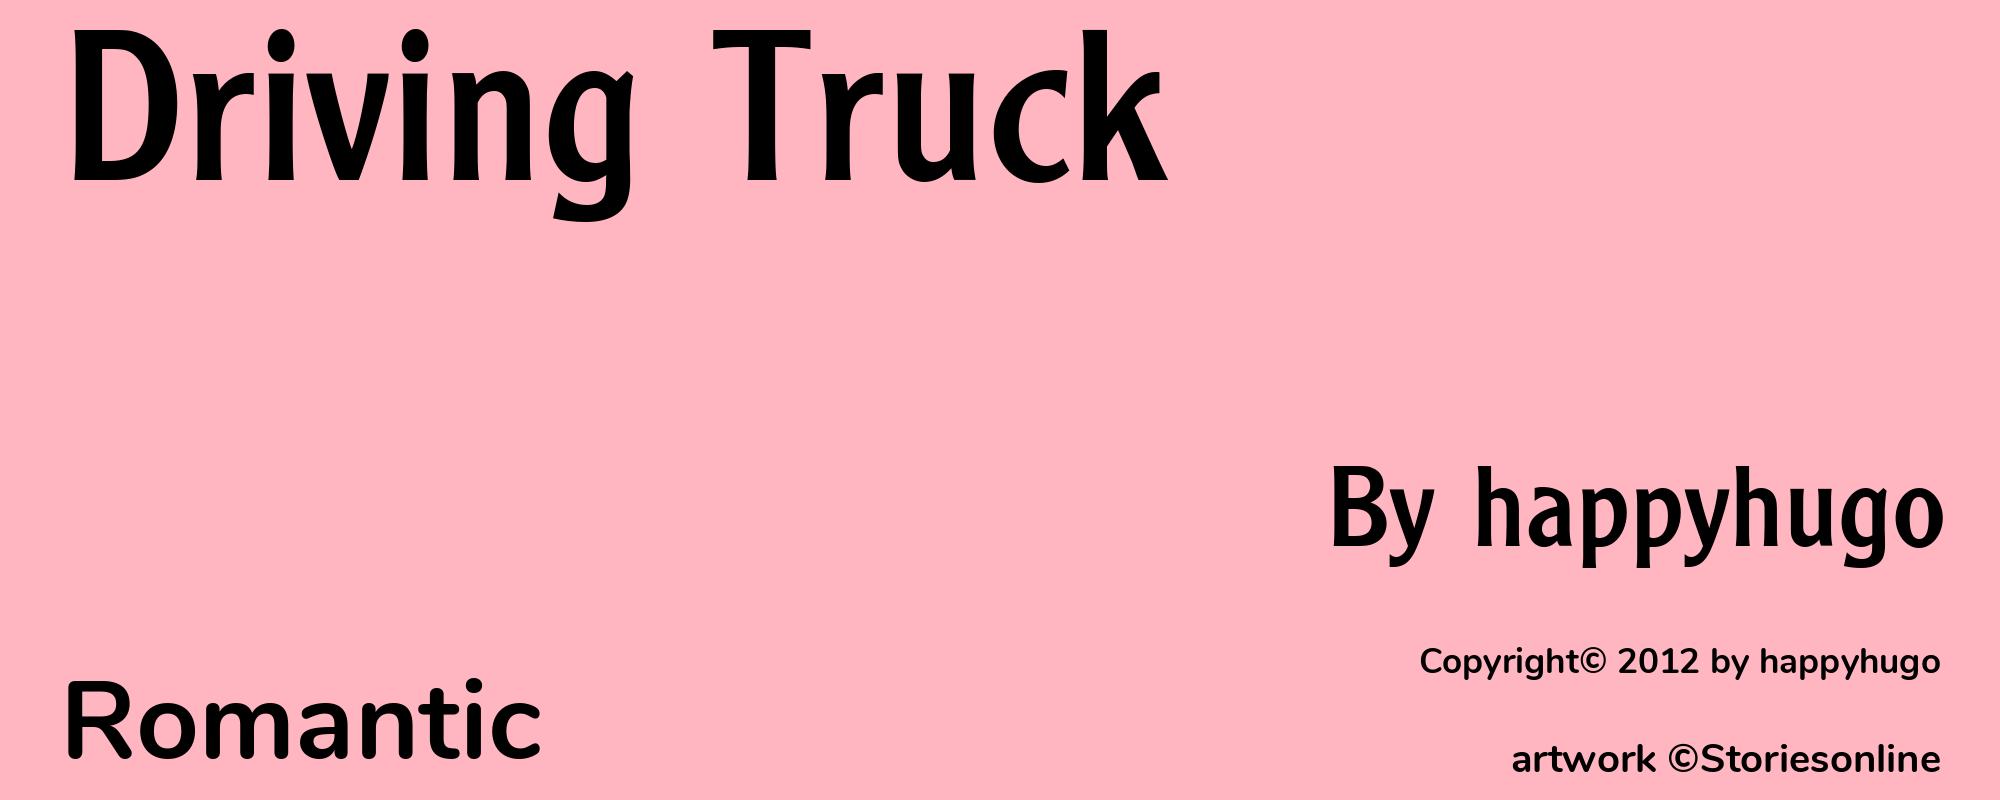 Driving Truck - Cover